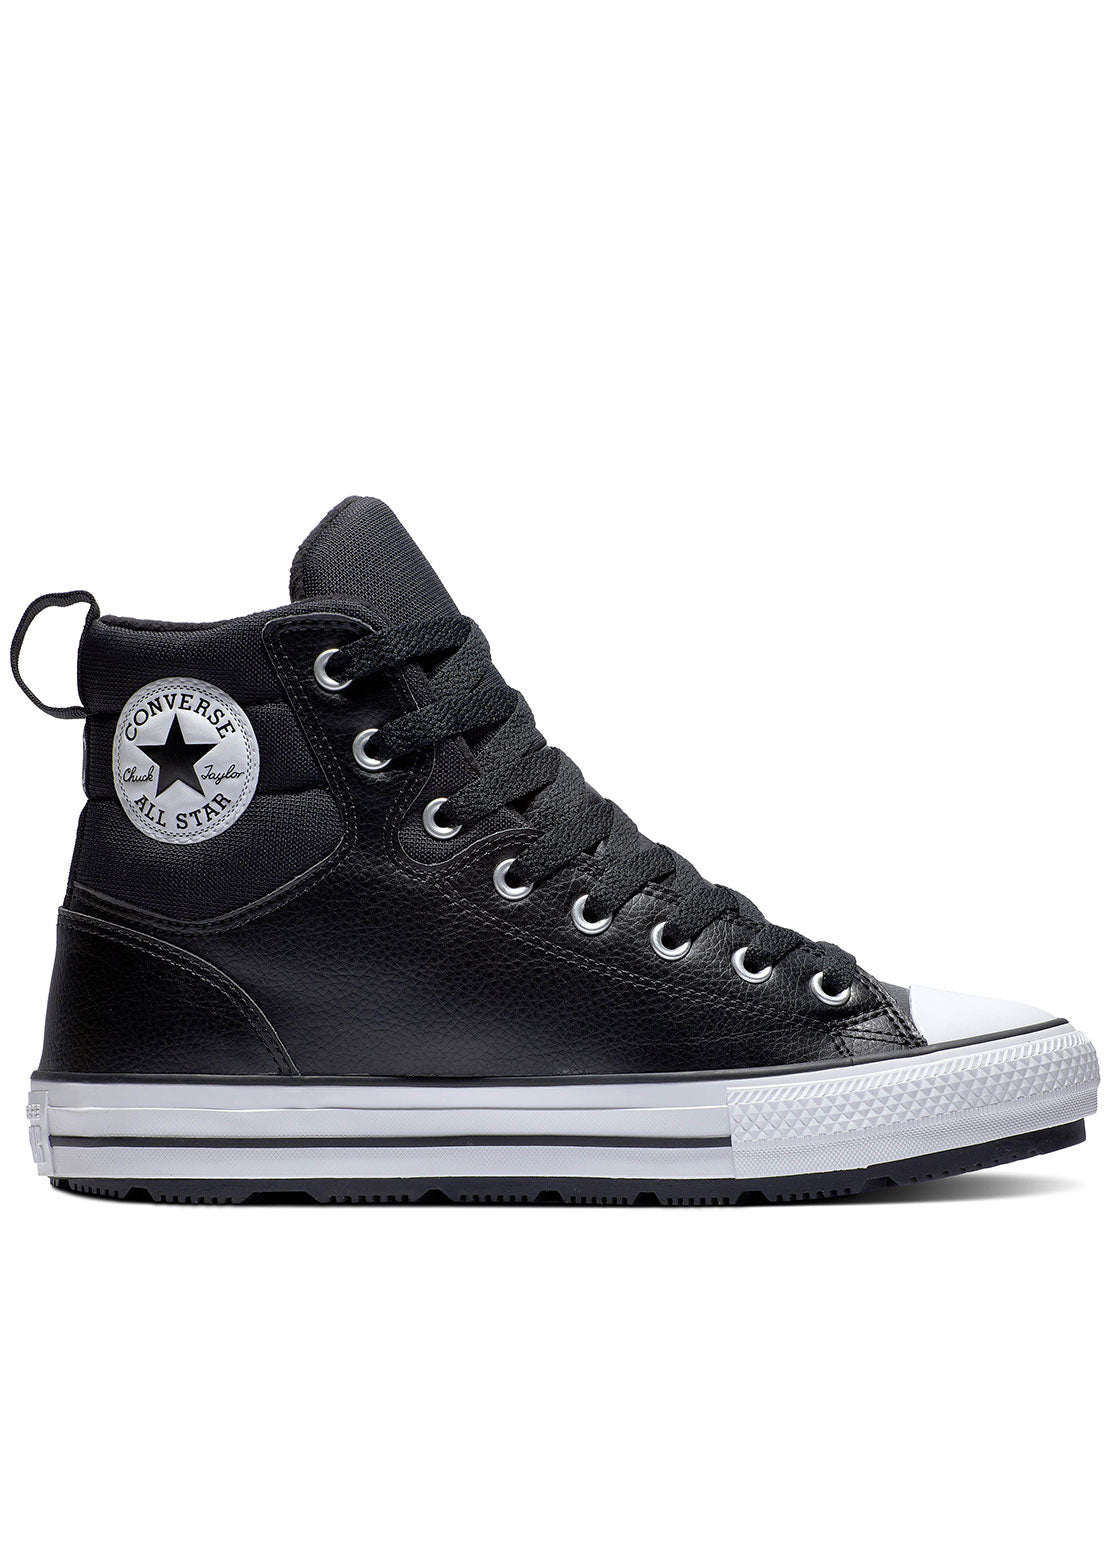 Converse Unisex Chuck Taylor All Star Faux Leather Berkshire Boots Black/White/Black